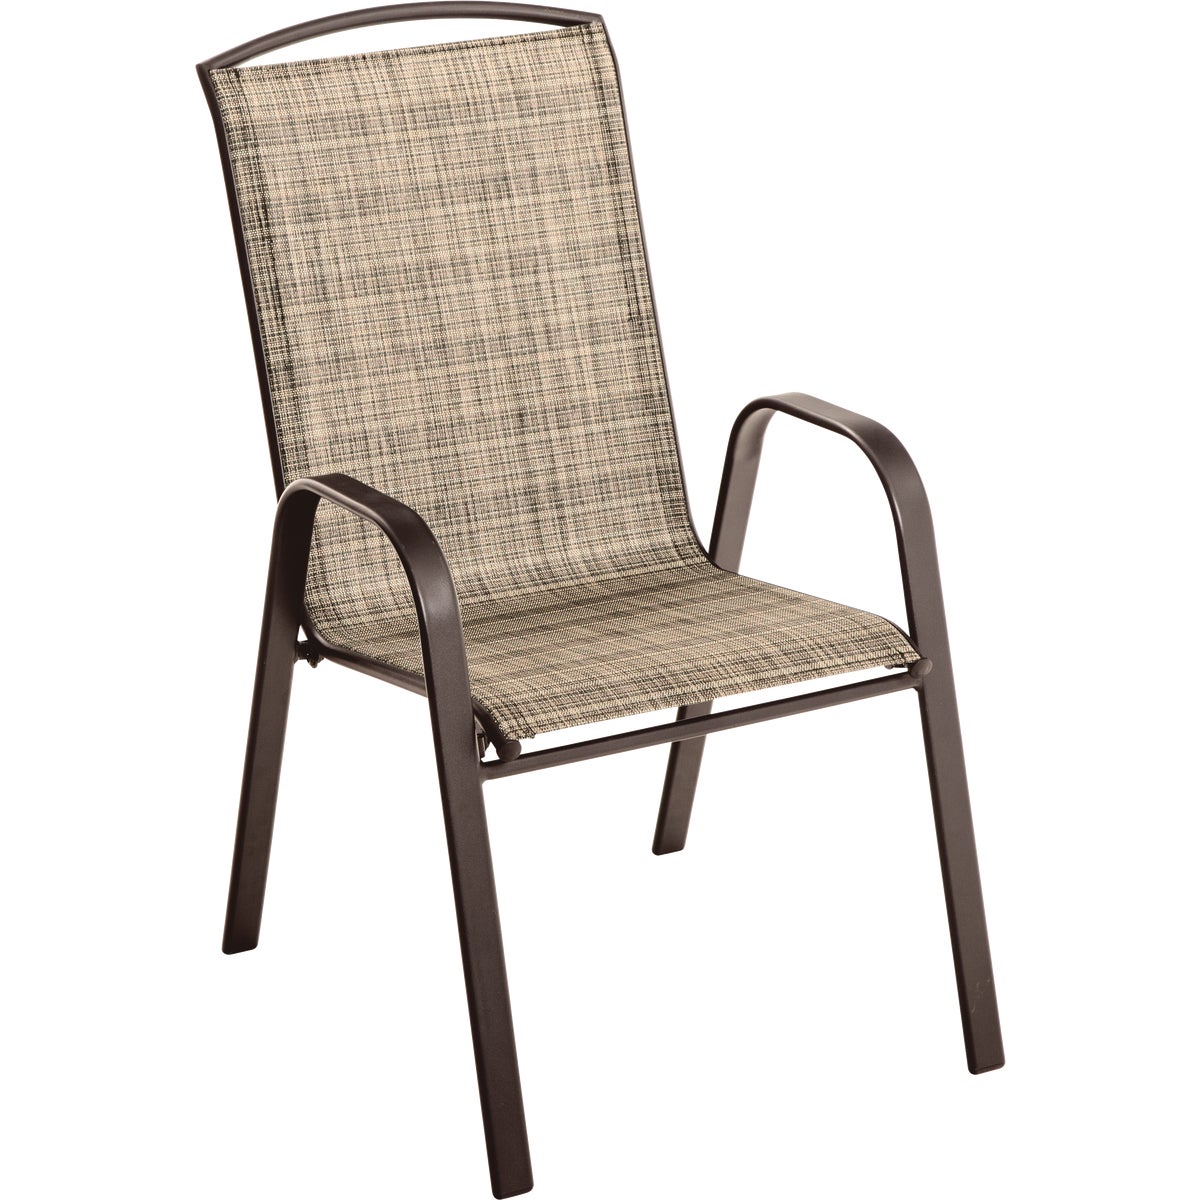 Outdoor Expressions Windsor Brown Steel Sling Stacking Chair